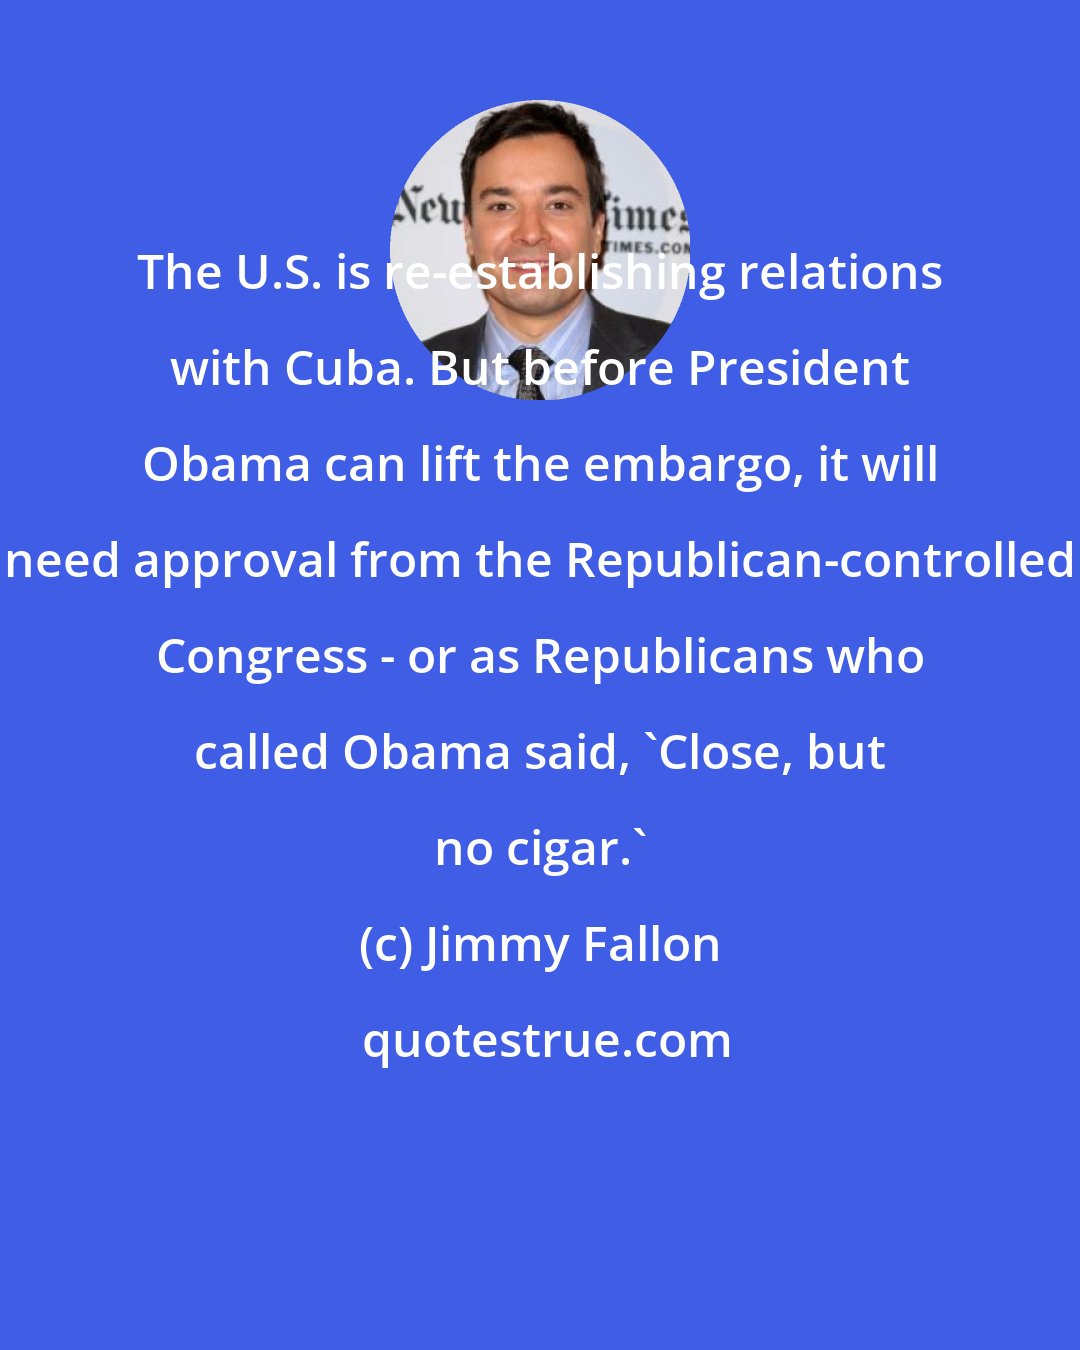 Jimmy Fallon: The U.S. is re-establishing relations with Cuba. But before President Obama can lift the embargo, it will need approval from the Republican-controlled Congress - or as Republicans who called Obama said, 'Close, but no cigar.'